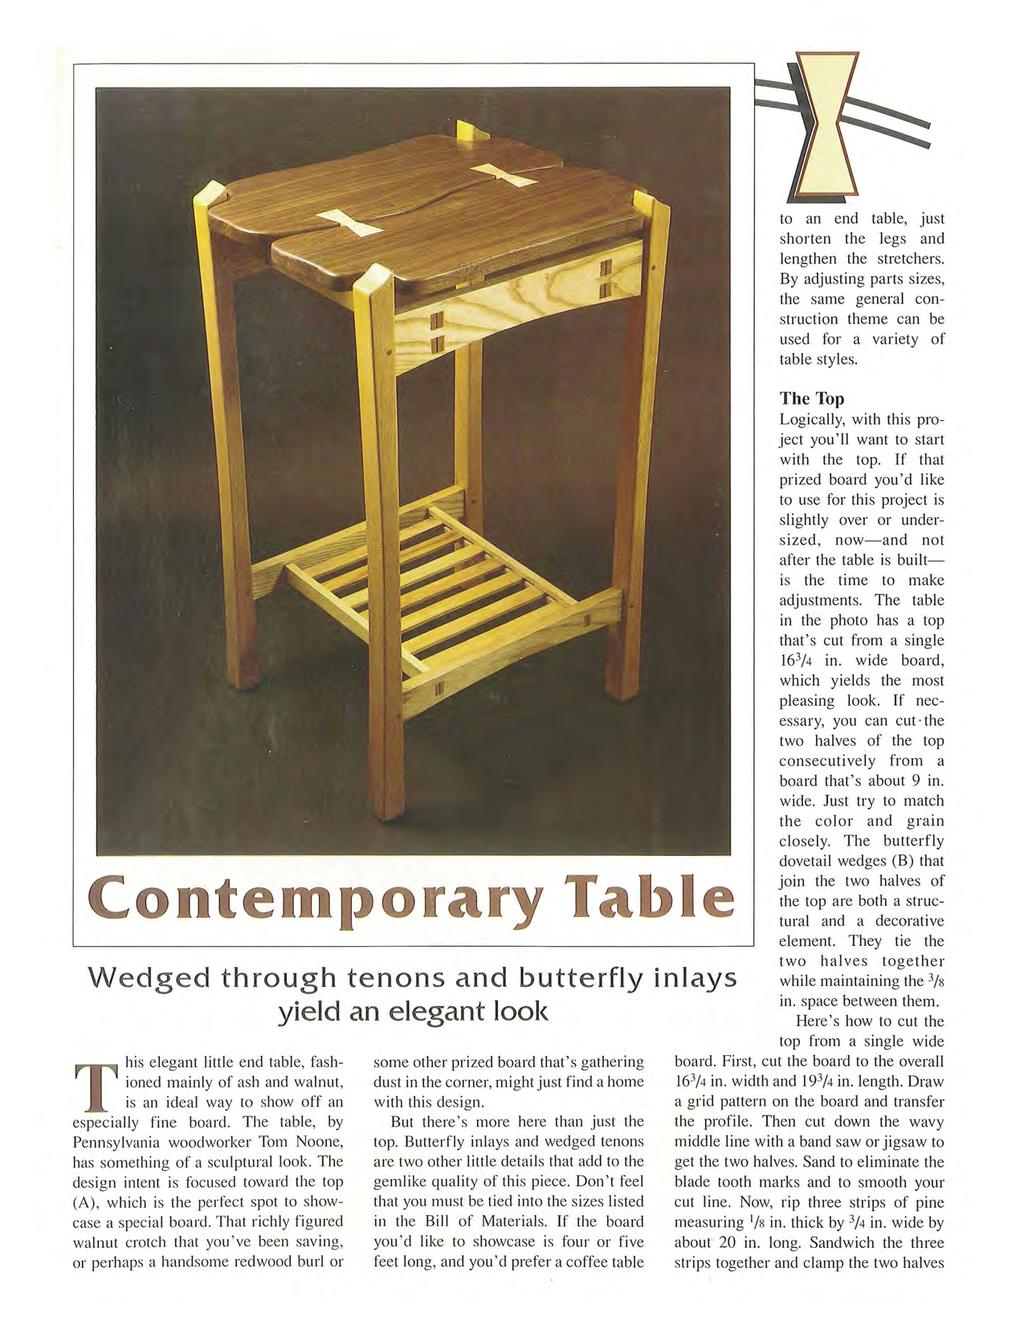 Conte 0 le Wedged through tenons and butterfly inlays yield an elegant look his elegant little end table, fashioned mainly of ash and walnut, T is an ideal way to show off an especially fine board.